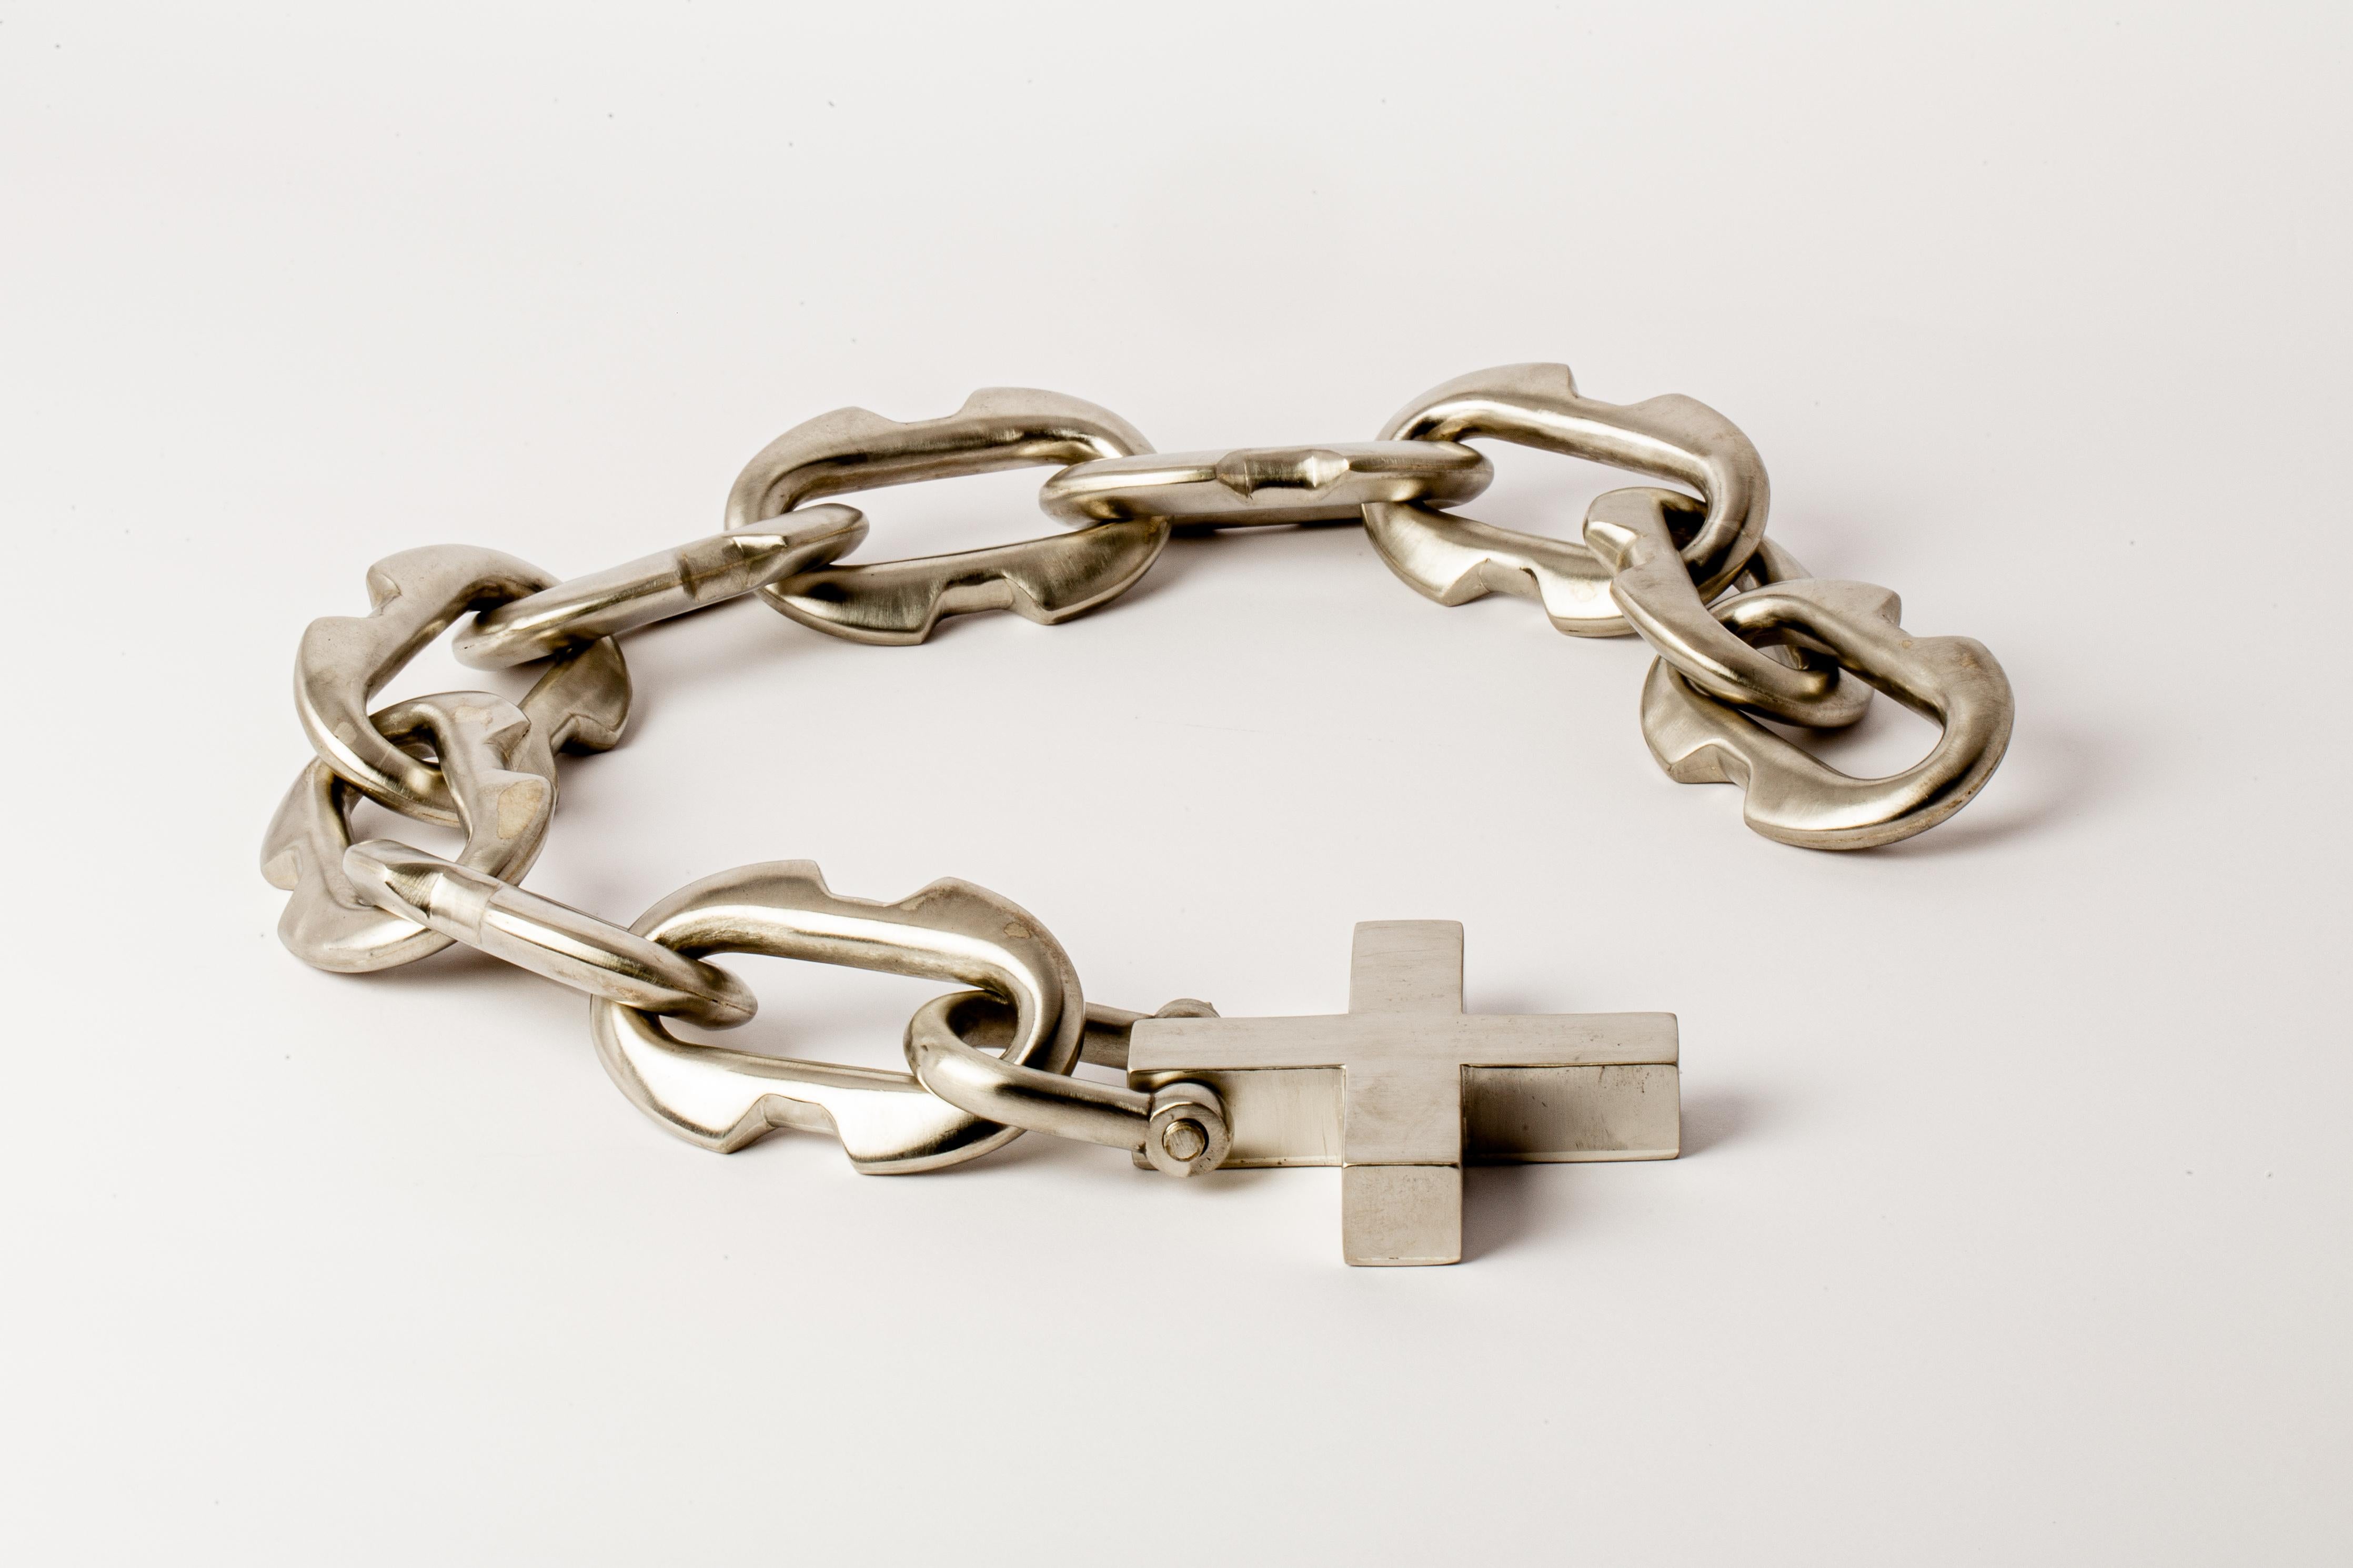 Chain necklace in bronze.
Chain link size (L × H): 70 mm × 43 mm
Chain length: 550 mm
Plus height: 72 mm
U-bolt (H × W): 42 mm × 33 mm